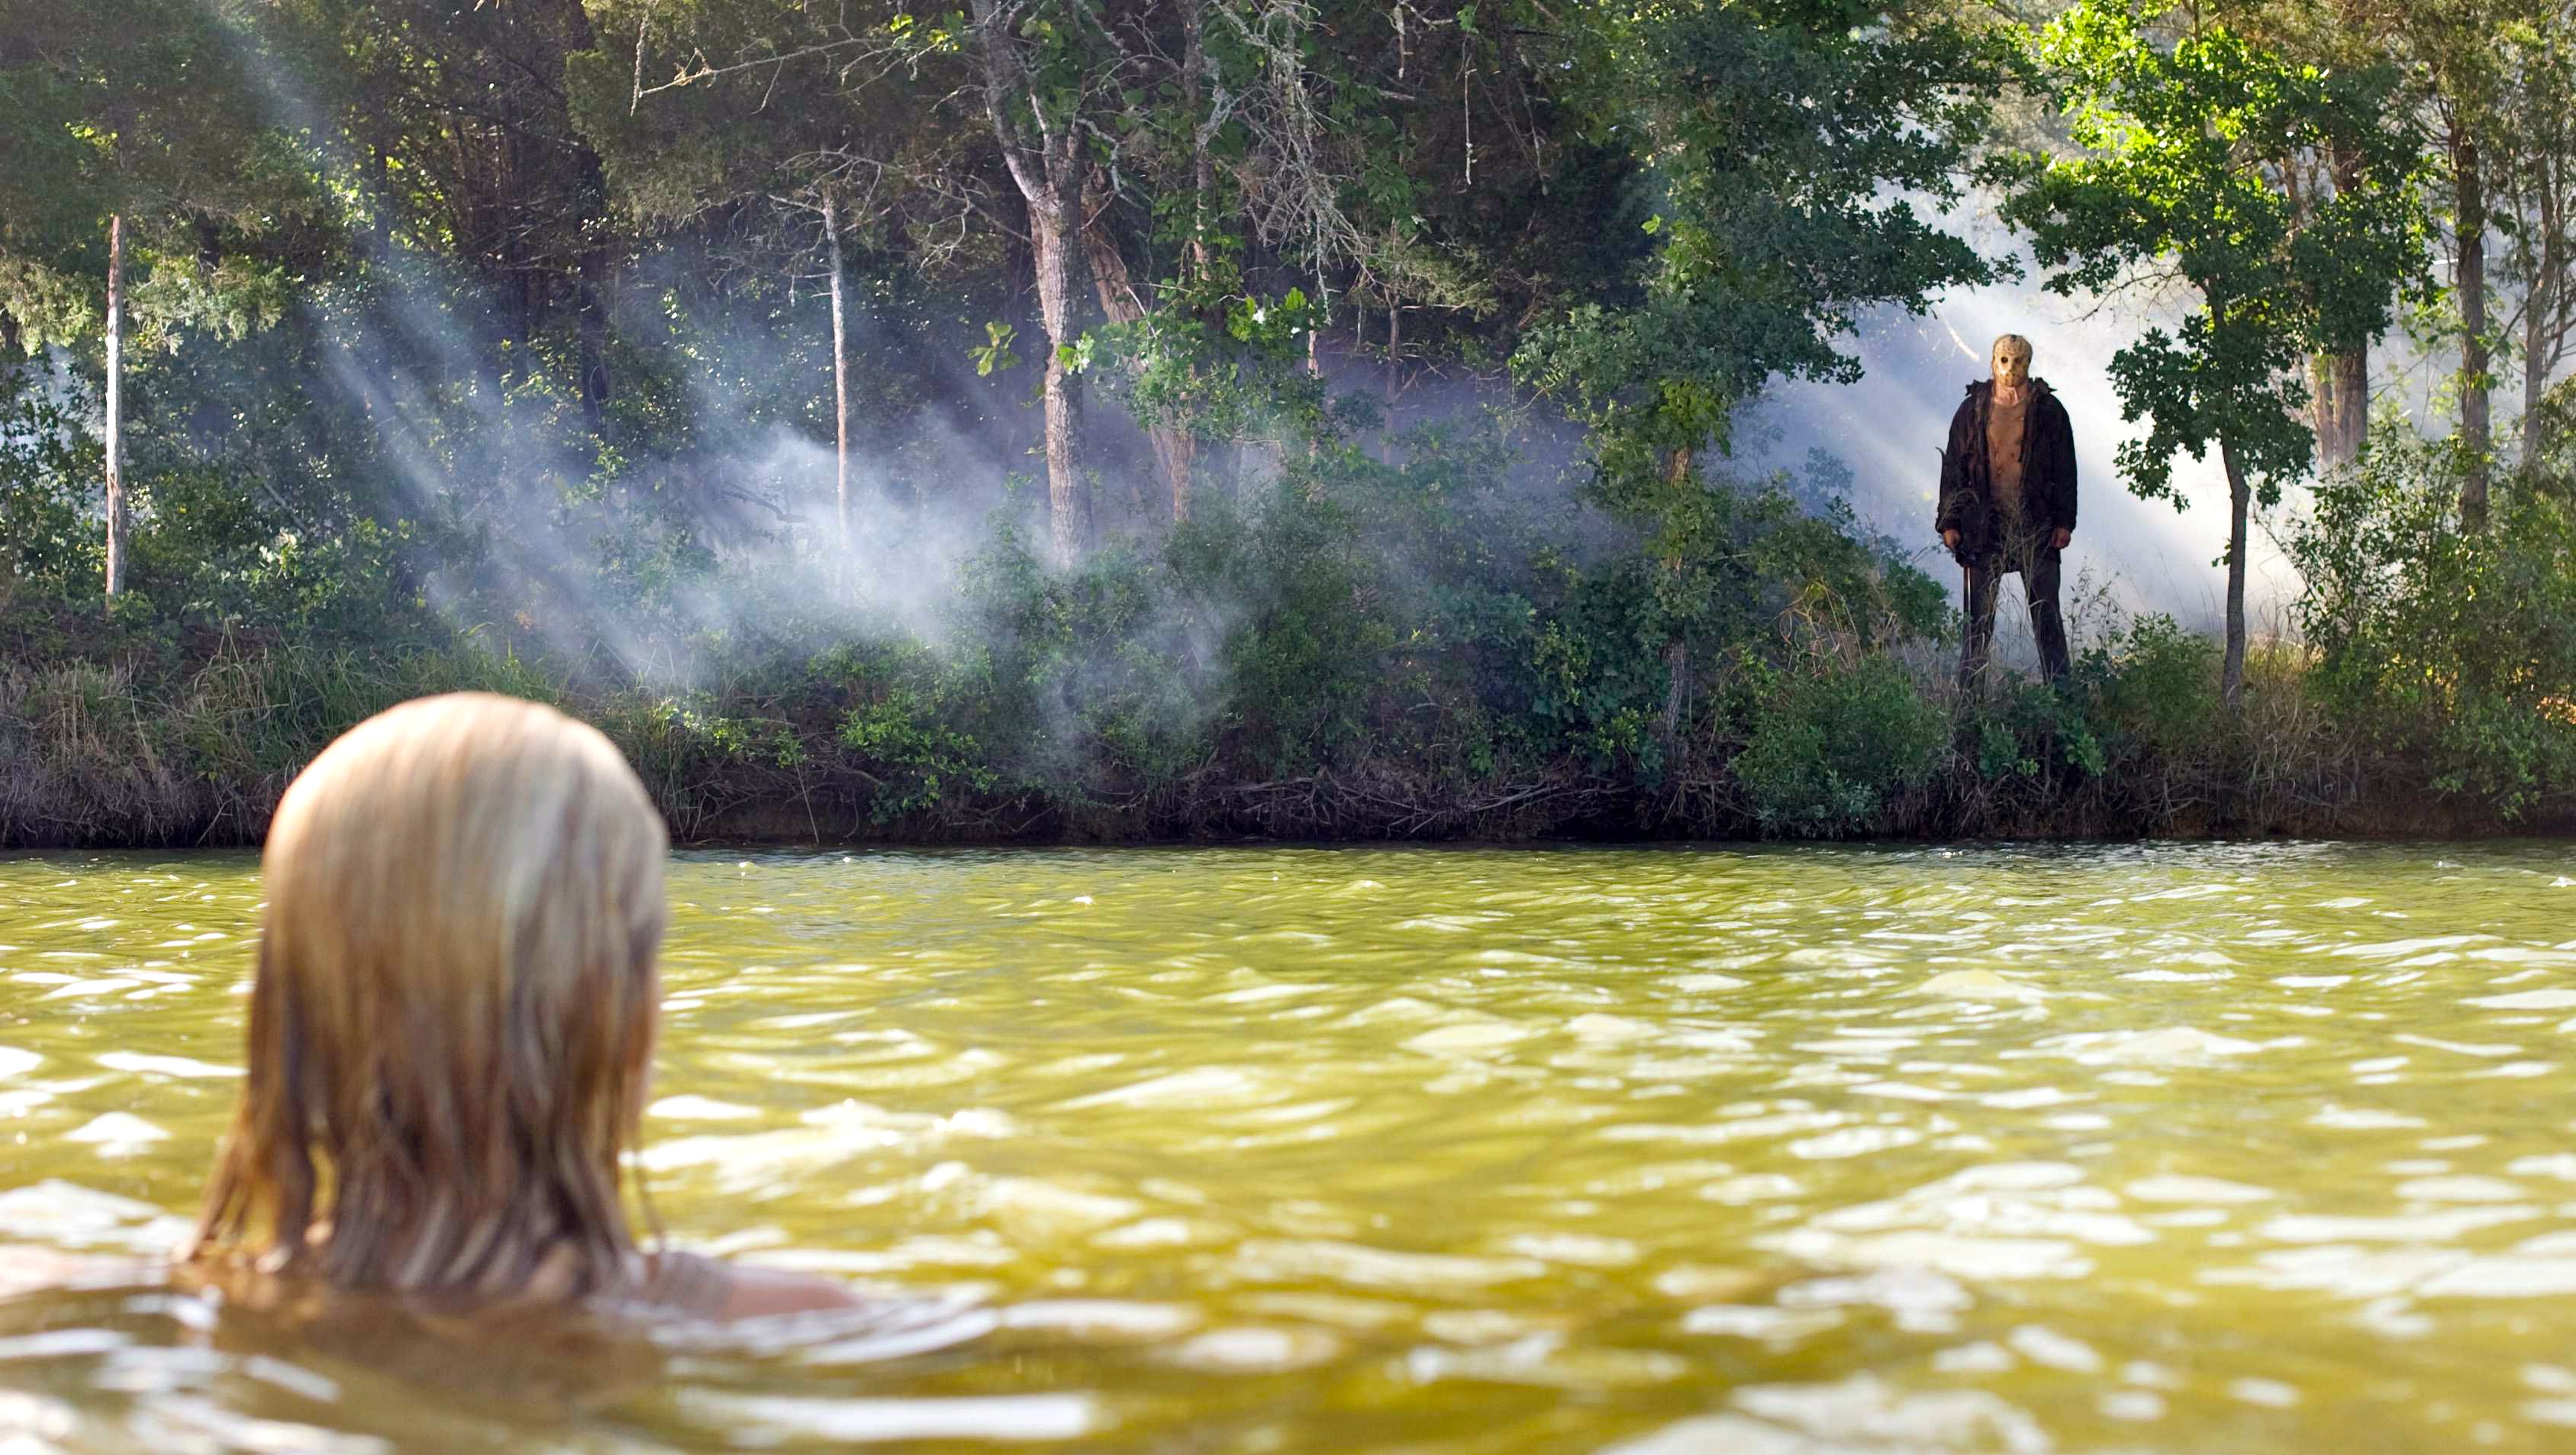 movie, friday the 13th (2009)